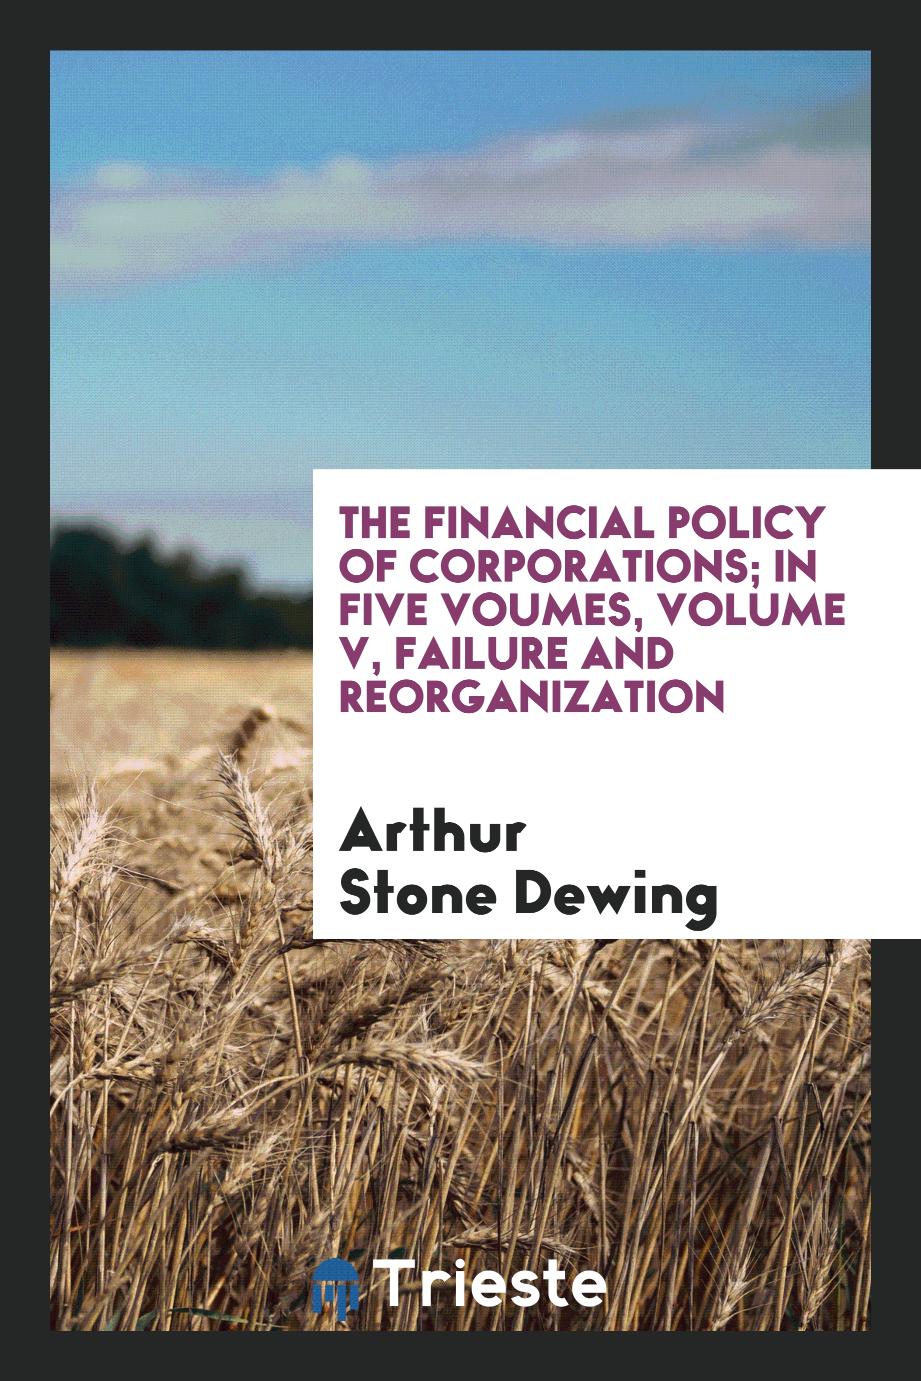 The financial policy of corporations; in five voumes, Volume V, Failure and reorganization